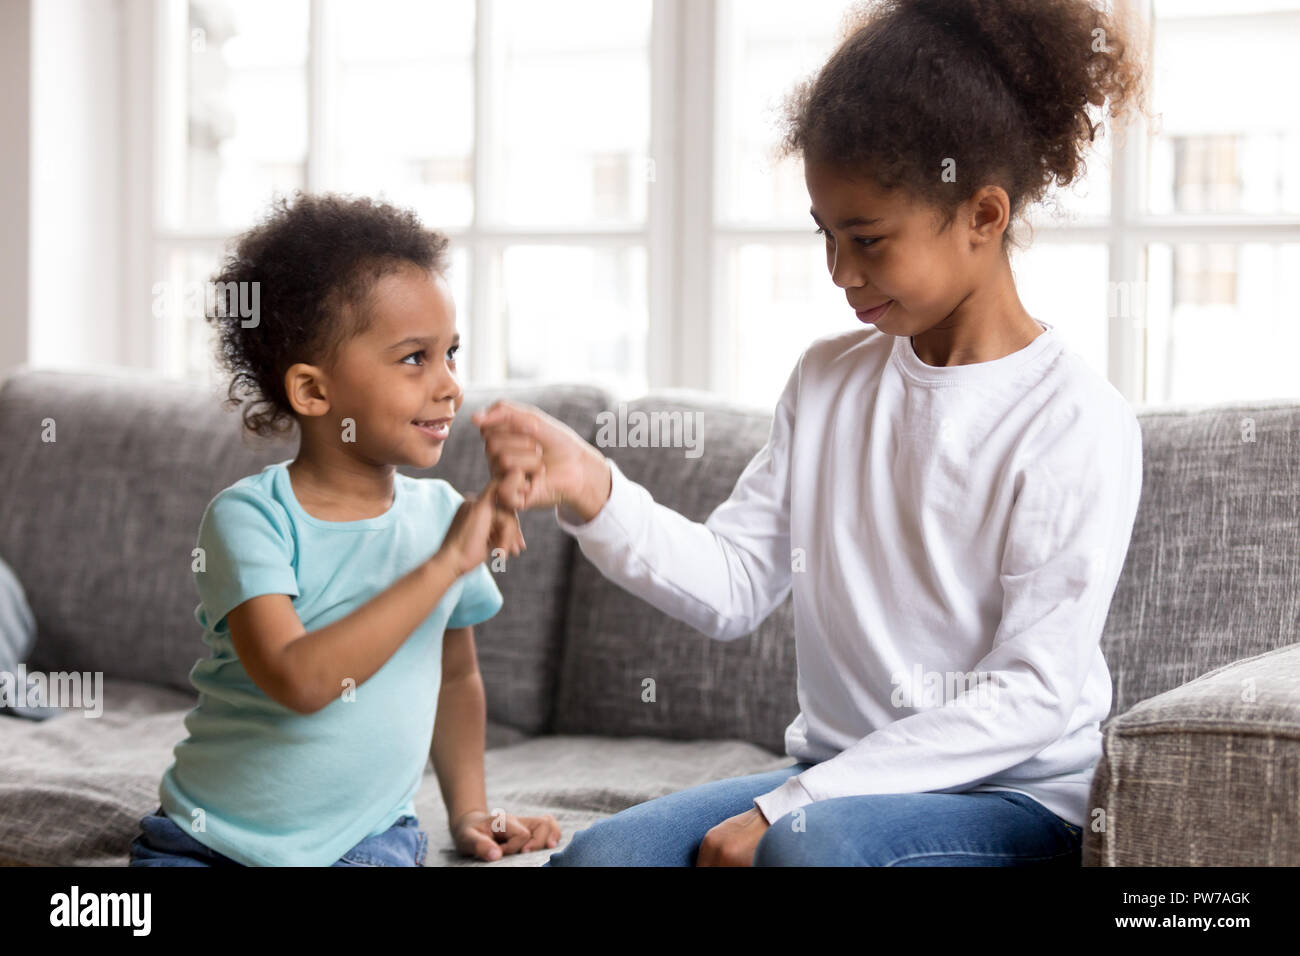 Brother and sister reconcile after fight joining pinkies Stock Photo